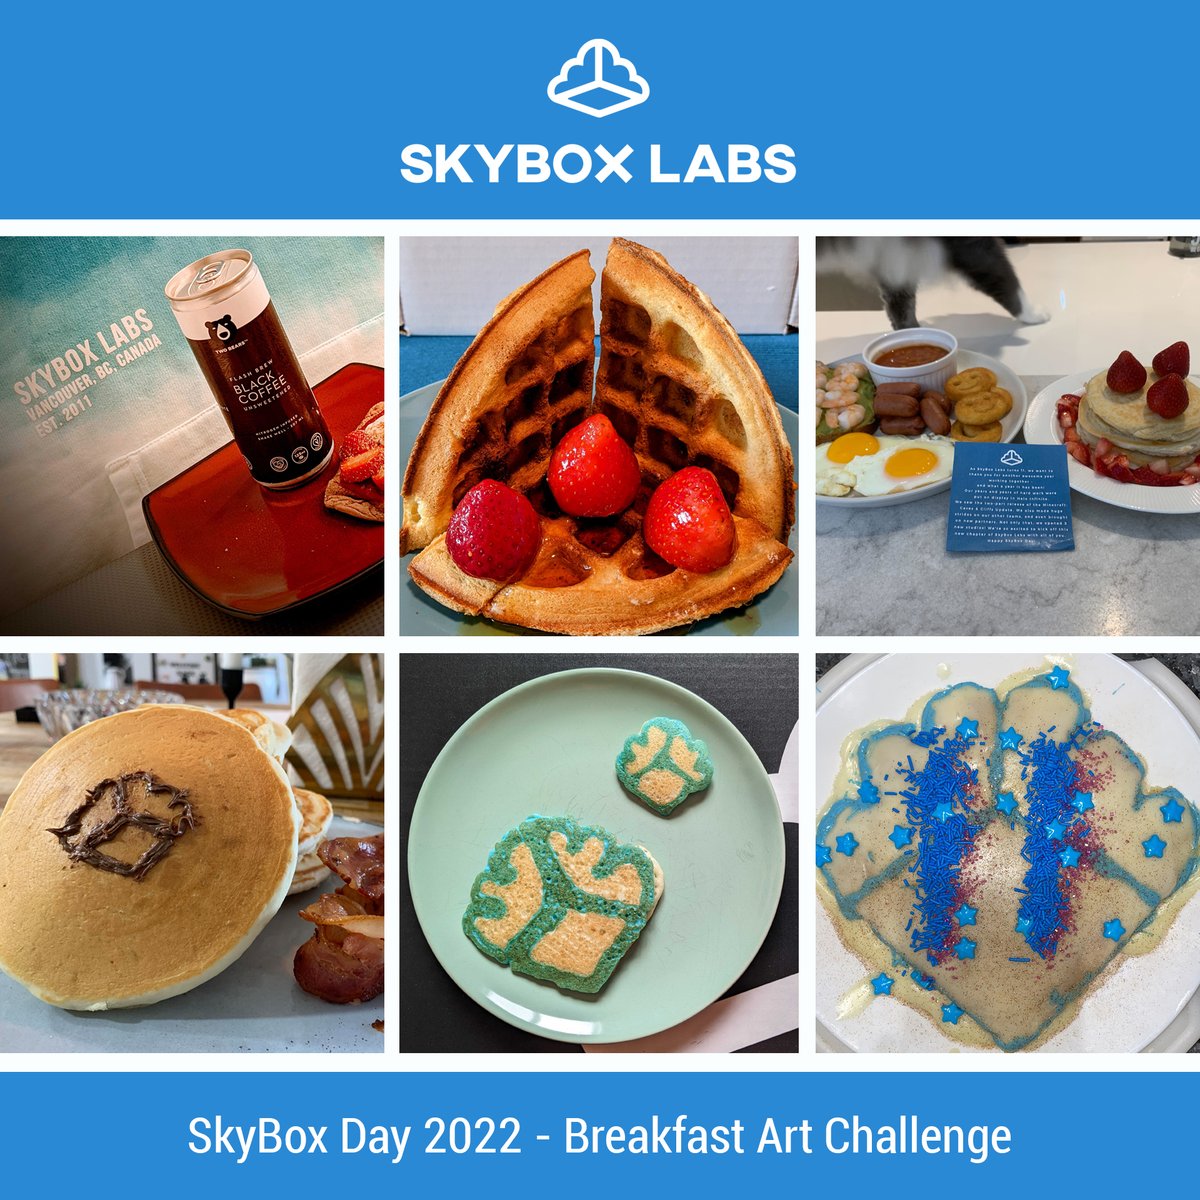 Today marks SkyBox Labs’ 11th anniversary! When we first started working from home, we created a breakfast art challenge to celebrate the day. Two years later and the contest is stronger than ever! There were too many submissions to share, but here are a few.